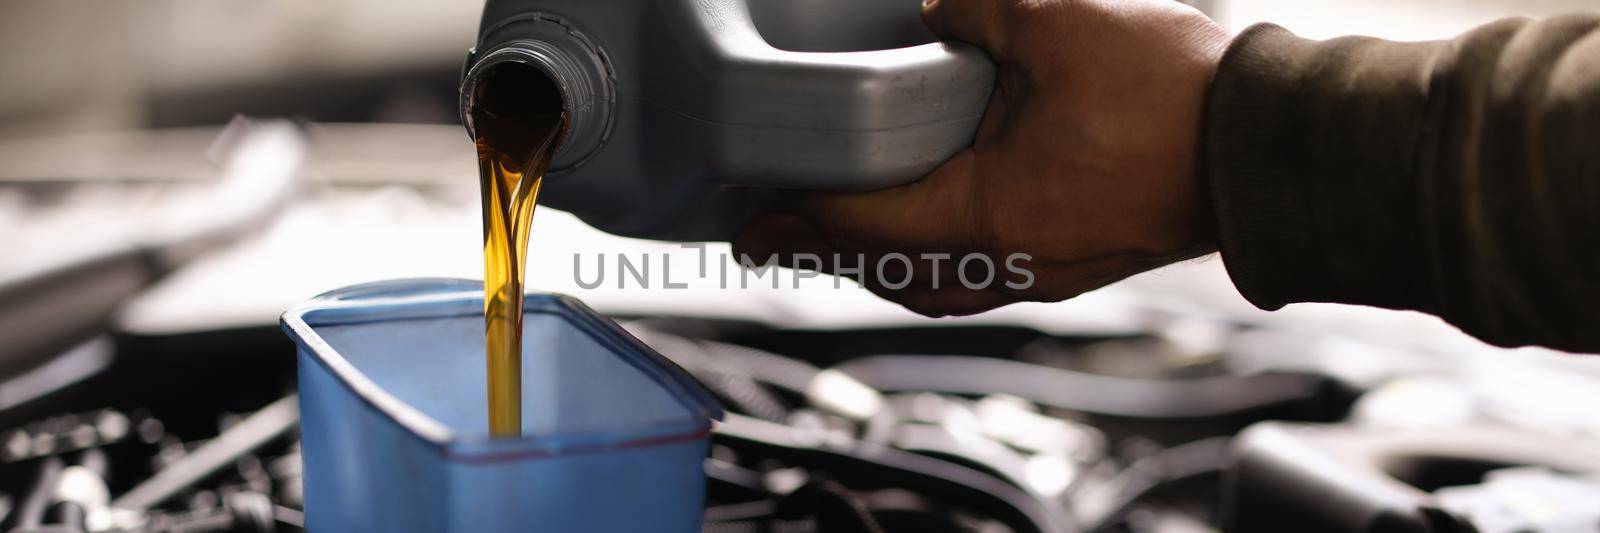 Foreman pours car oil into engine through watering can. Engine oil change intervals concept